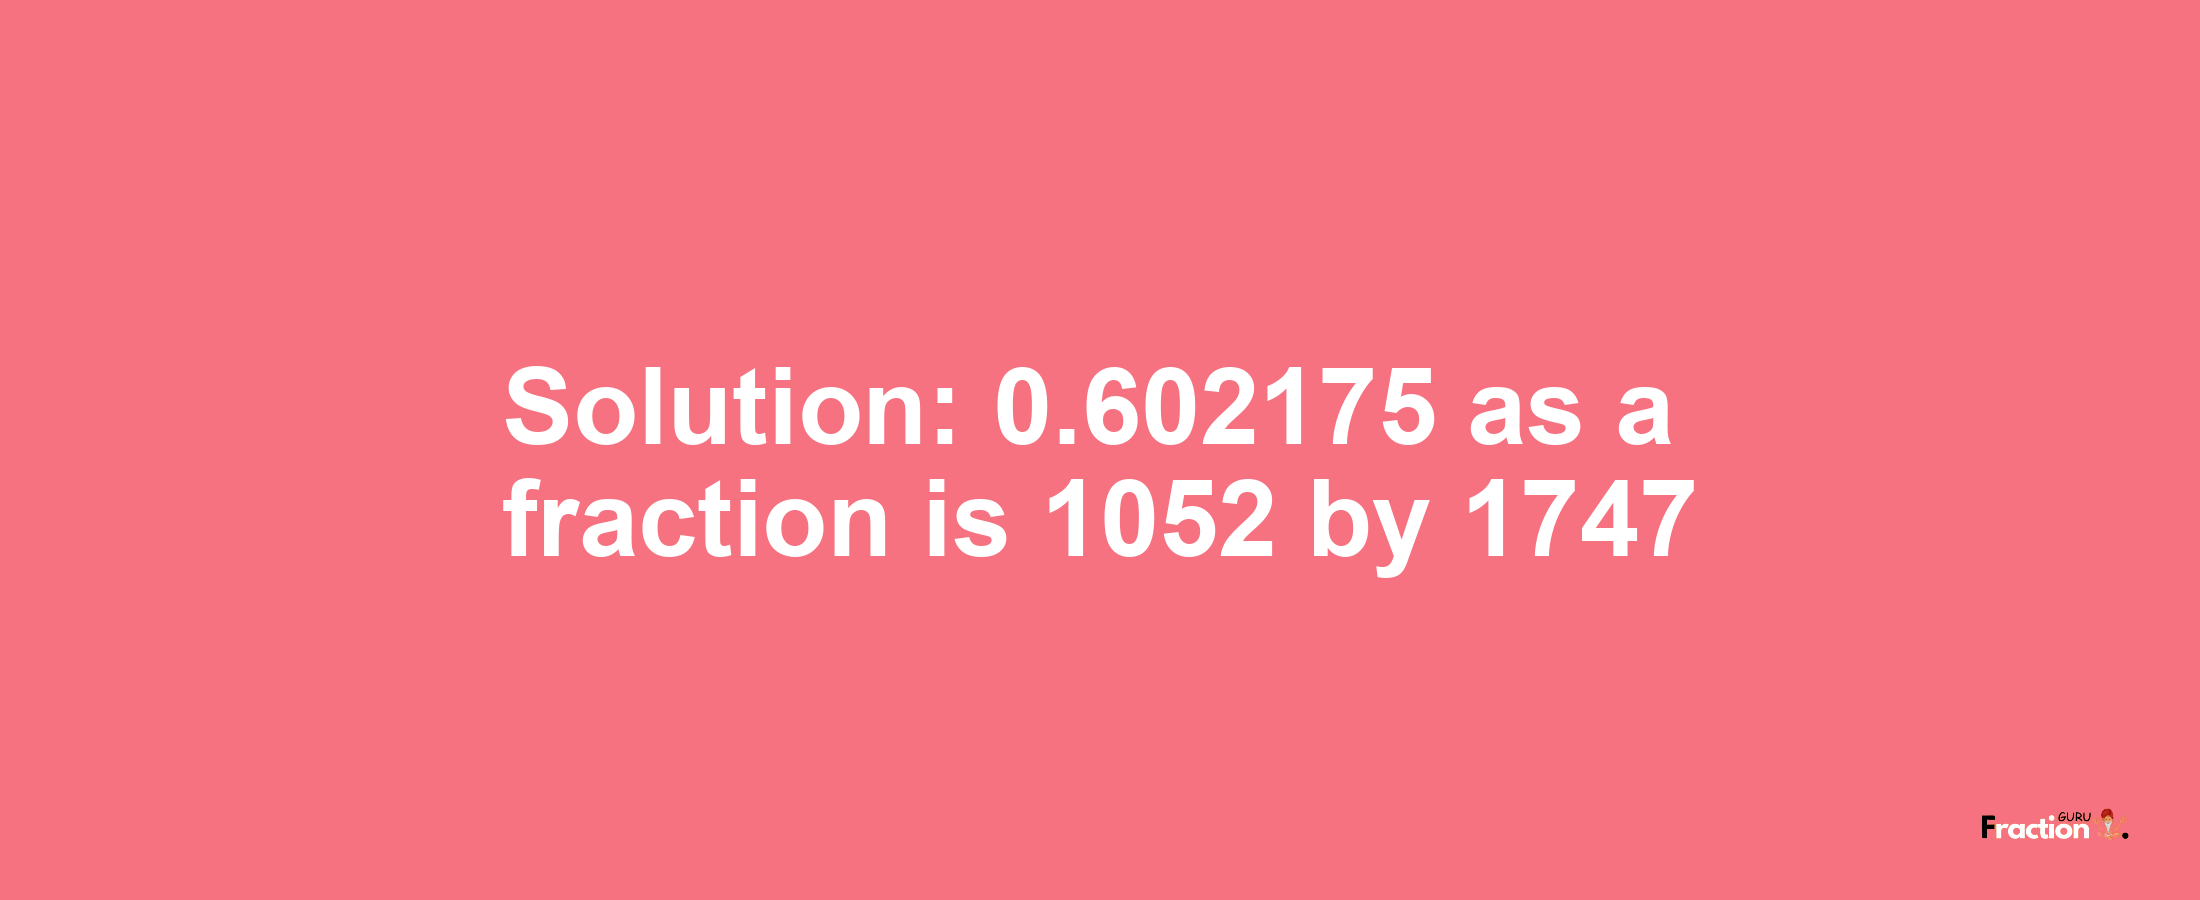 Solution:0.602175 as a fraction is 1052/1747